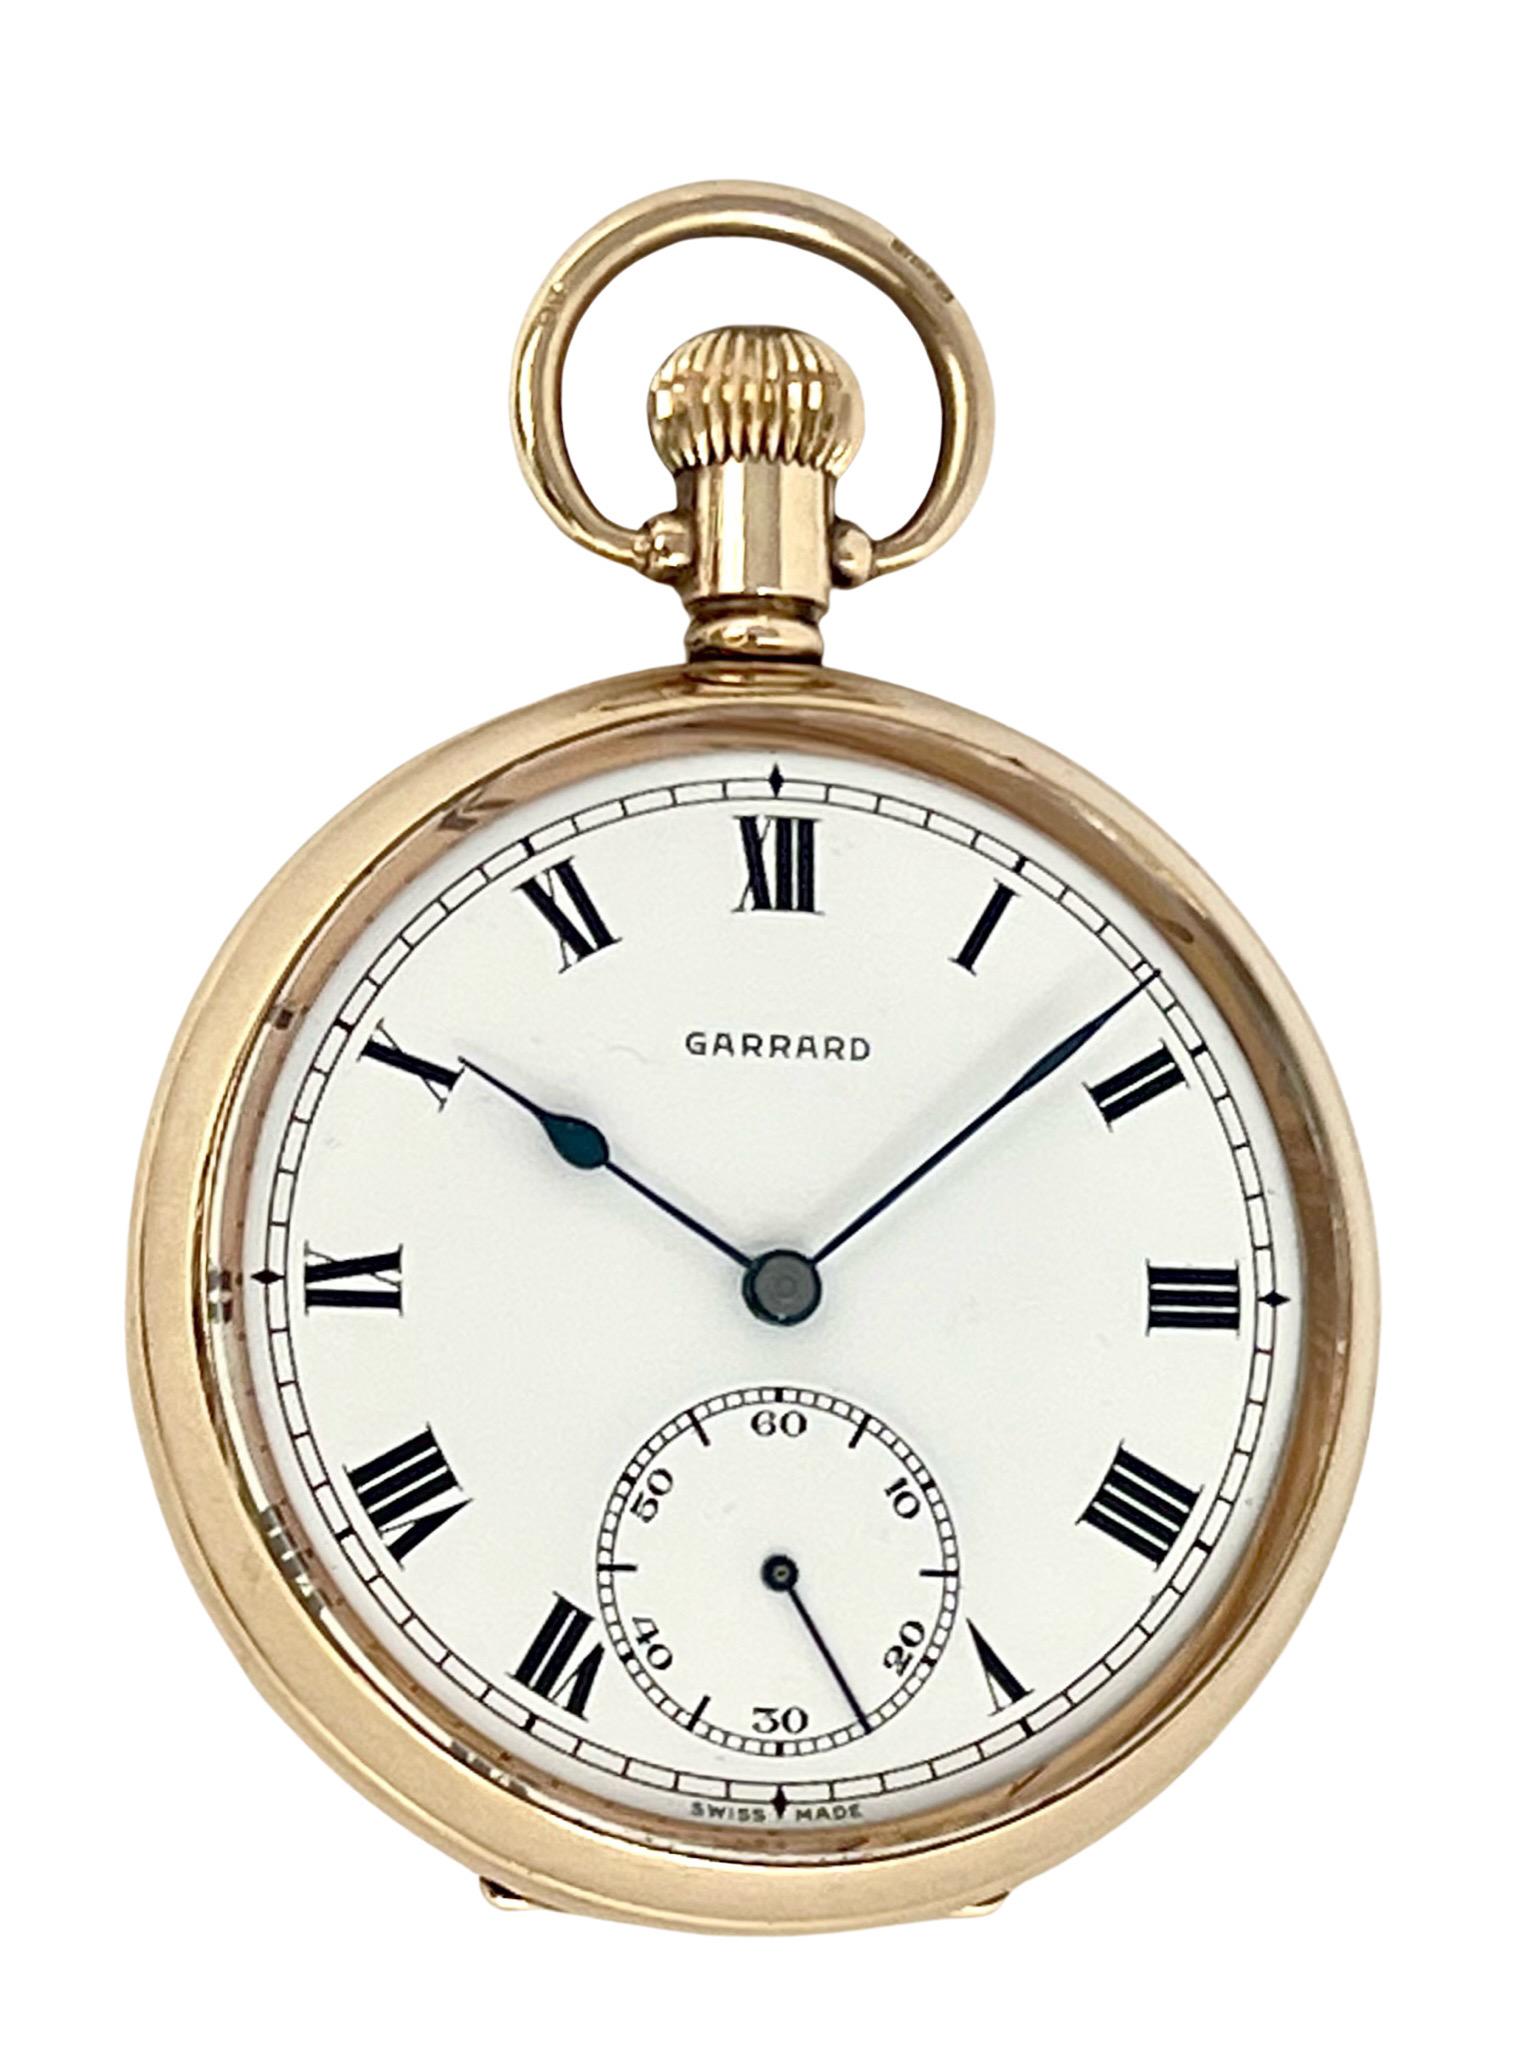 9 Carat Solid Gold Open Faced Pocket Watch by Garrard For Sale 2